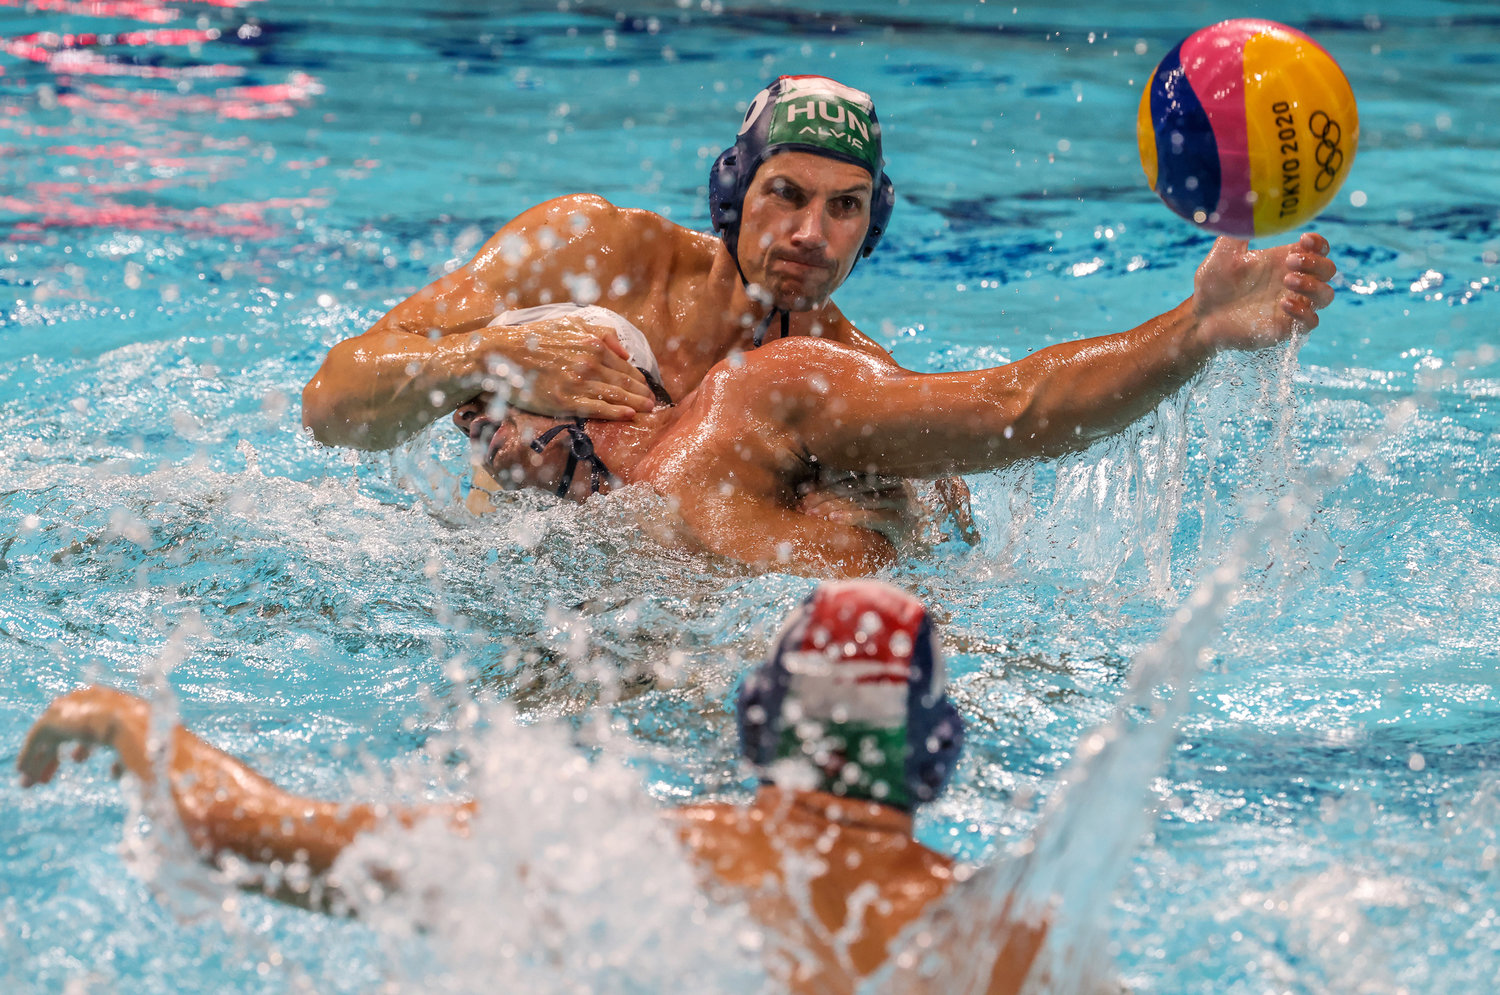 Team United States forward Ben Hallock (7) is smothered by Team Hungary driver Denes Varga (10) in a Water Polo Men's Prelim at Tatsumi Water Polo Center on Saturday, July 31, 2021 in Tokyo, Japan.